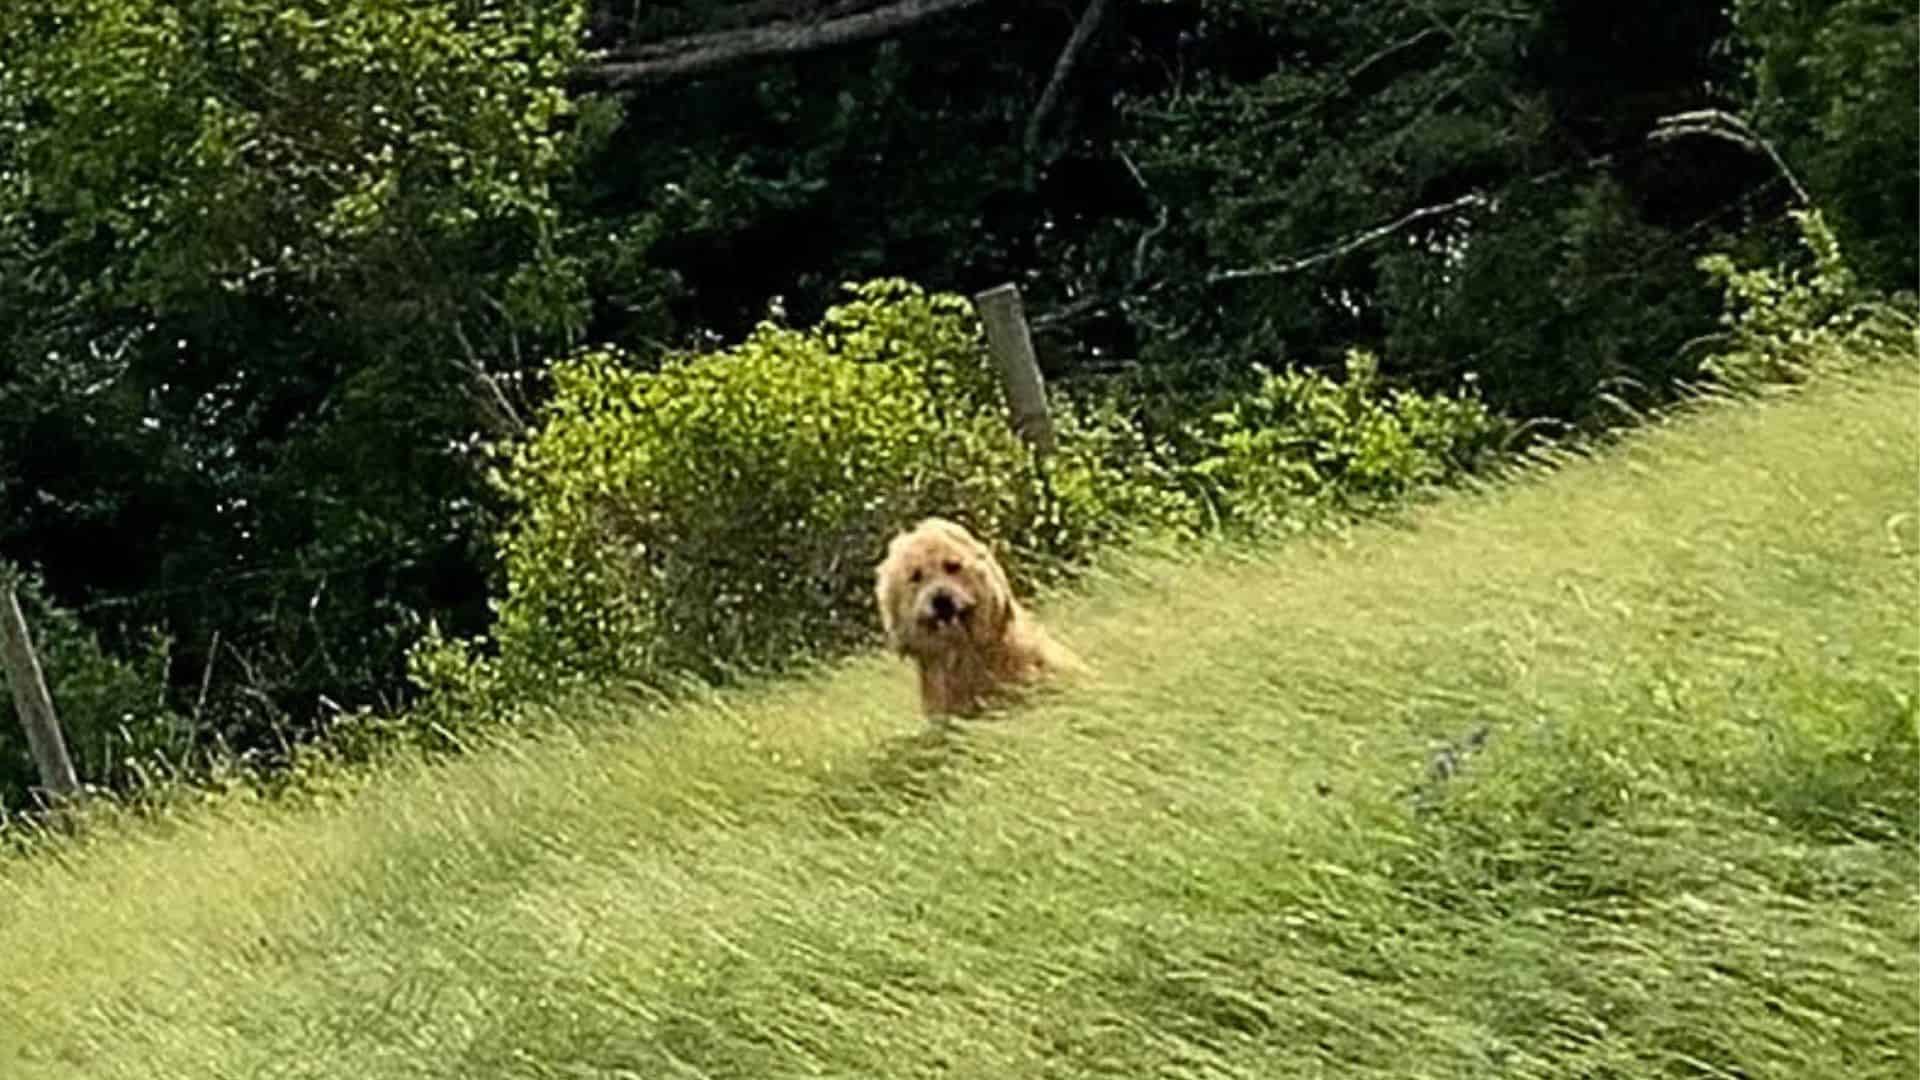 Rescuers Were Surprised By This Stray Dog Sitting In The Grass So They Went To Help